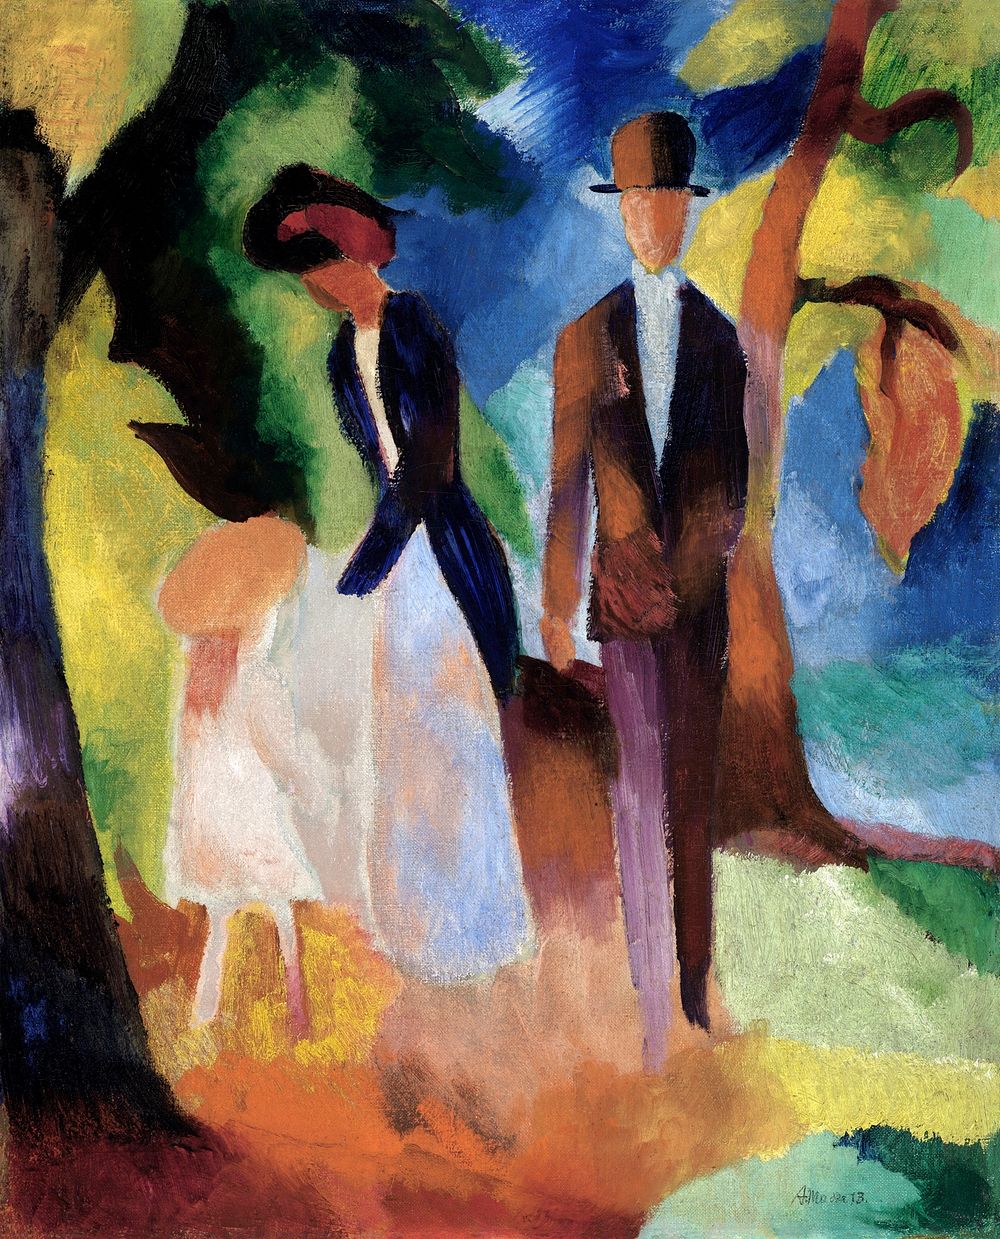 August Macke's People by a Blue Lake (1913) famous painting. Original from Wikimedia Commons. Digitally enhanced by rawpixel.